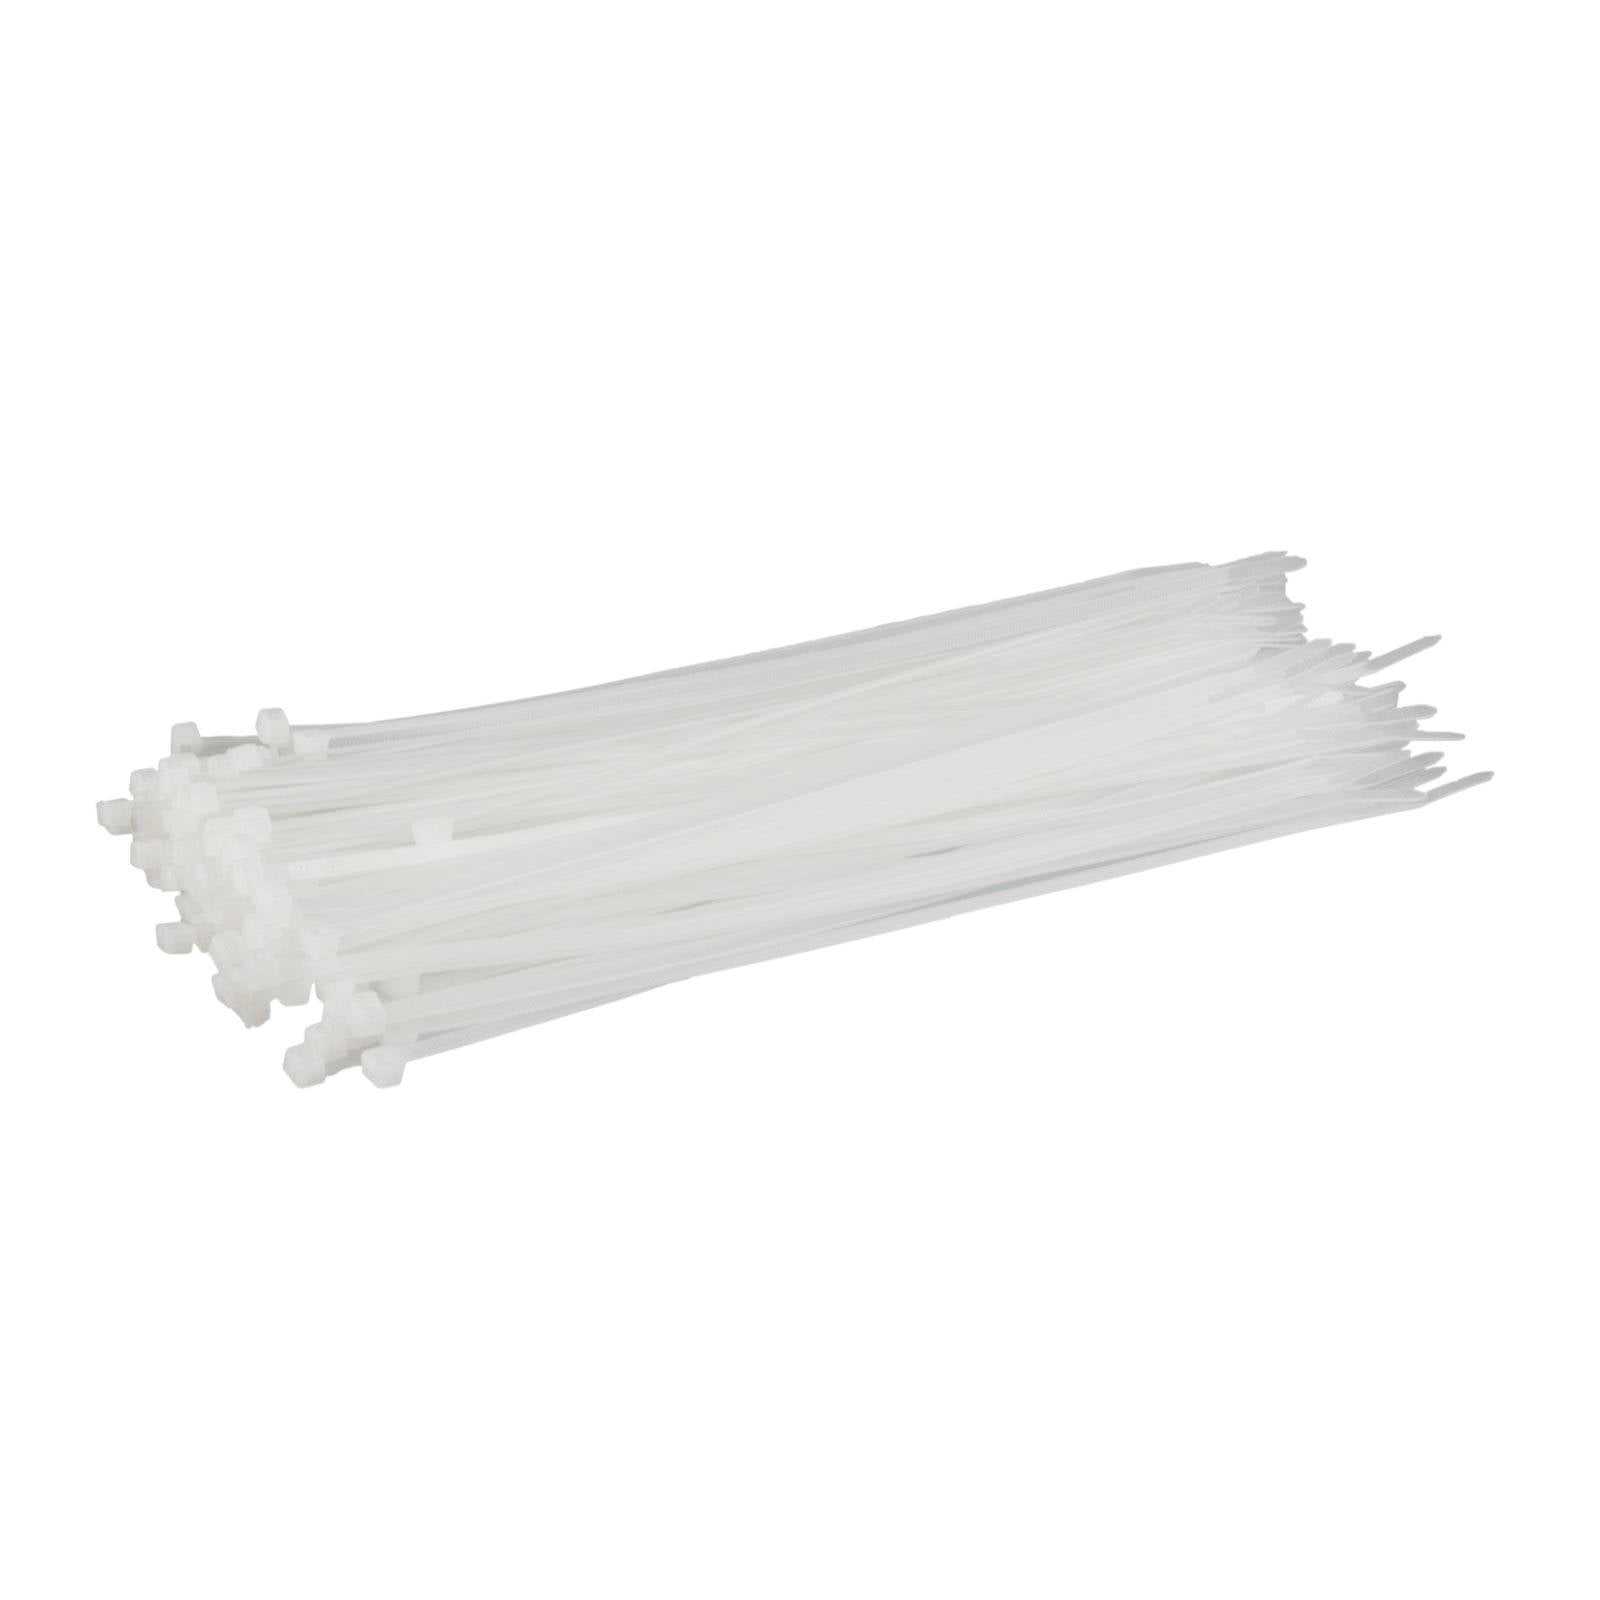 Whites Motorcycle Parts, WHITES CABLE TIES 100 X 2.5 mm 100pcs/BAG WHITE